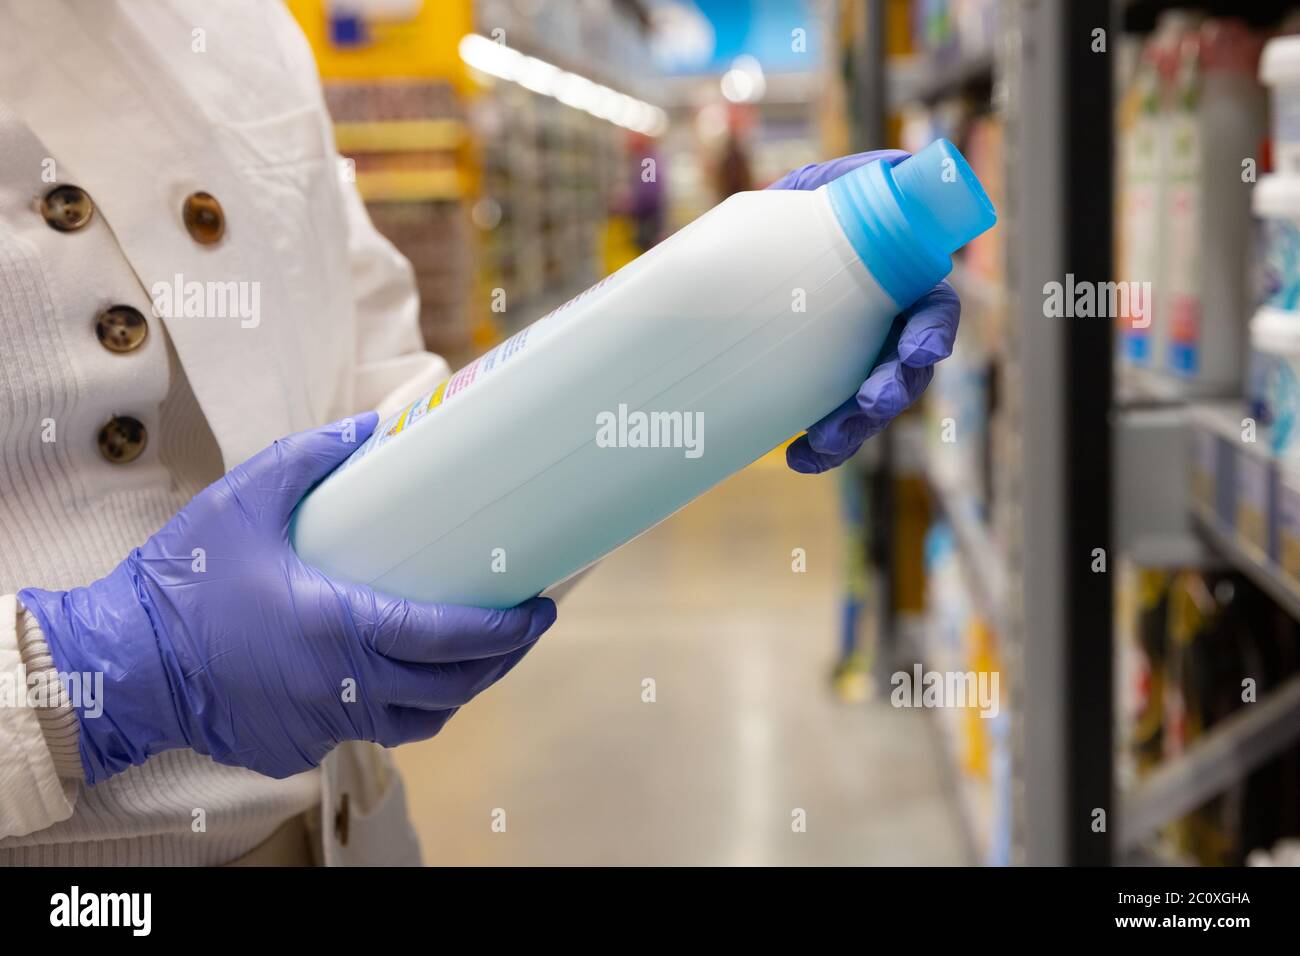 Woman wears rubber protective medical gloves, chooses household chemicals, disinfectant for home in supermarket, close up. Protective measures against Stock Photo